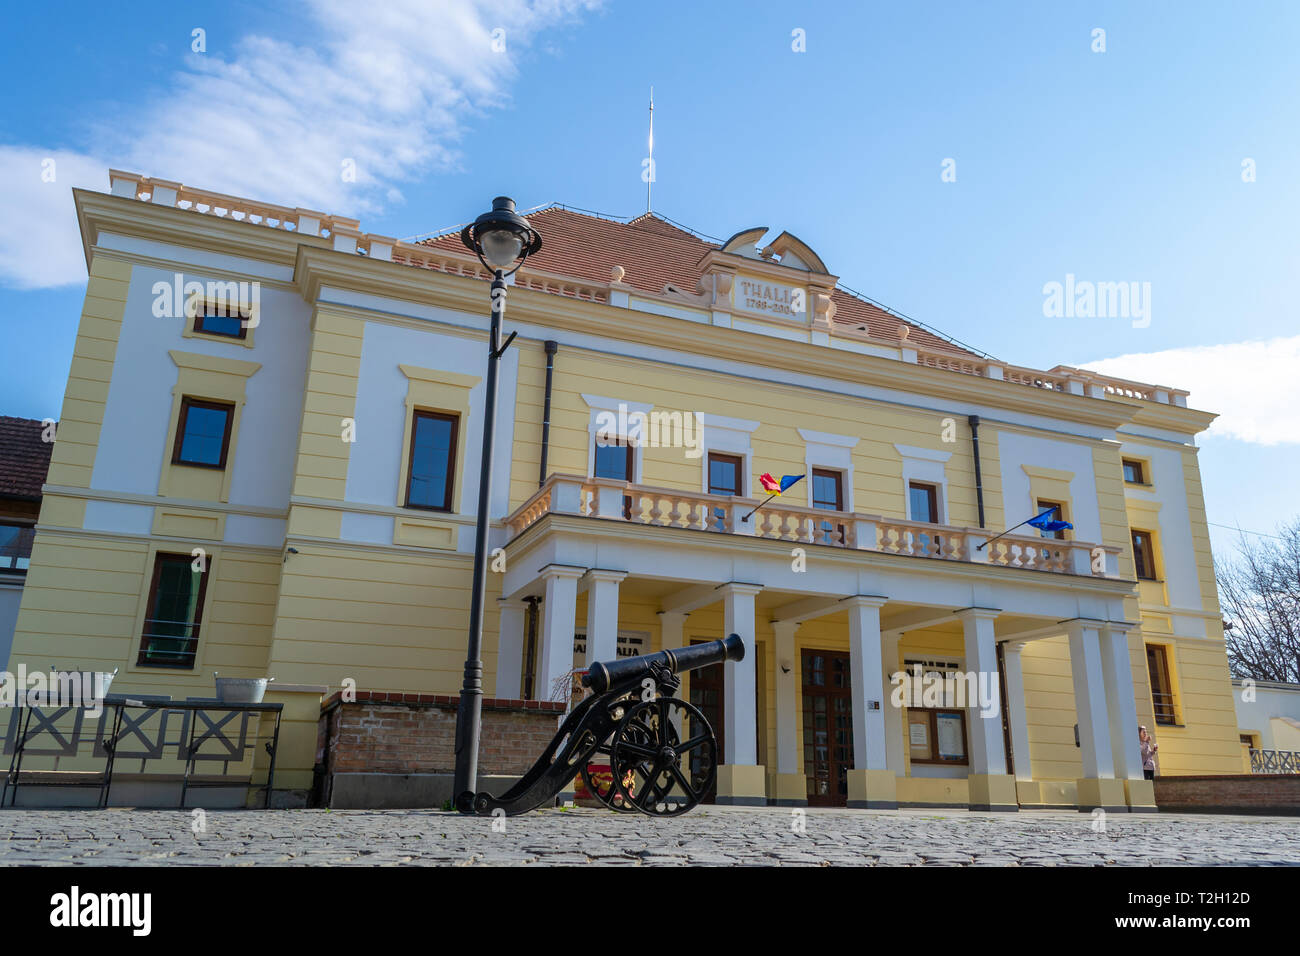 Sibiu, Romania - March 25, 2019: The Thalia Hall is a theatre and concert hall situated in Sibiu, Romania. As of October 7, 2004, the hall serves as t Stock Photo